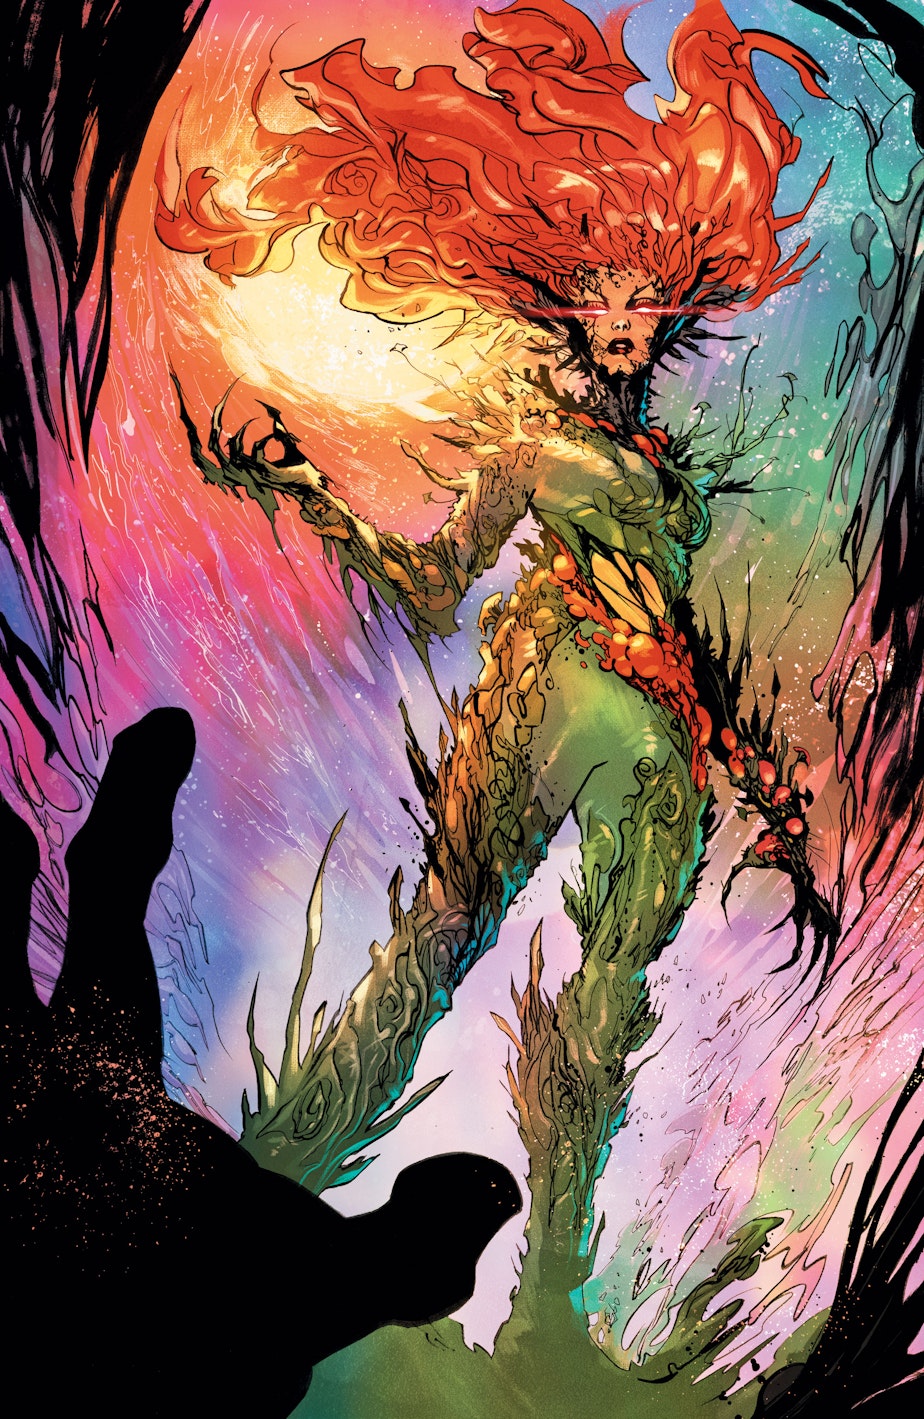 caption: DC Comics Poison Ivy is depicted as nightmarish but beautiful when she taps into her full powers in the series illustrated by Marcio Takara.